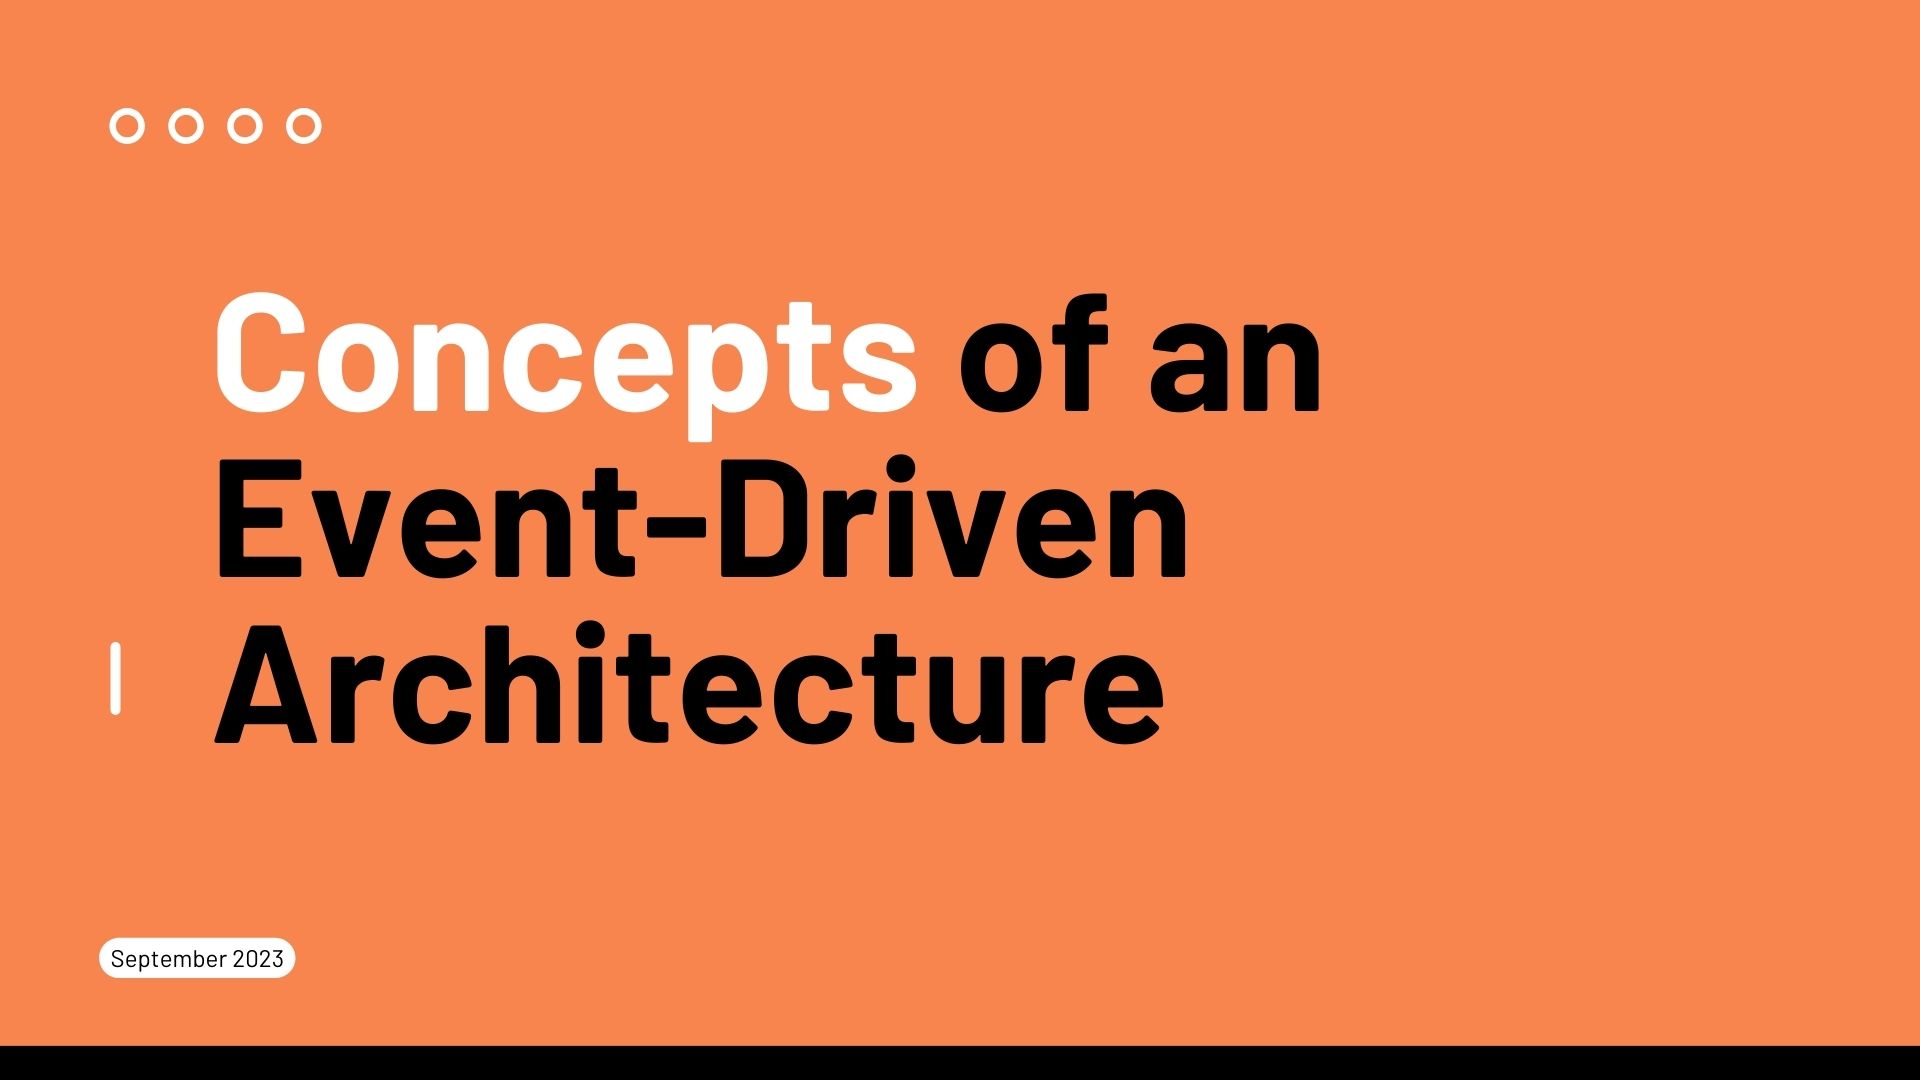 Concepts of an Event-Driven Architecture